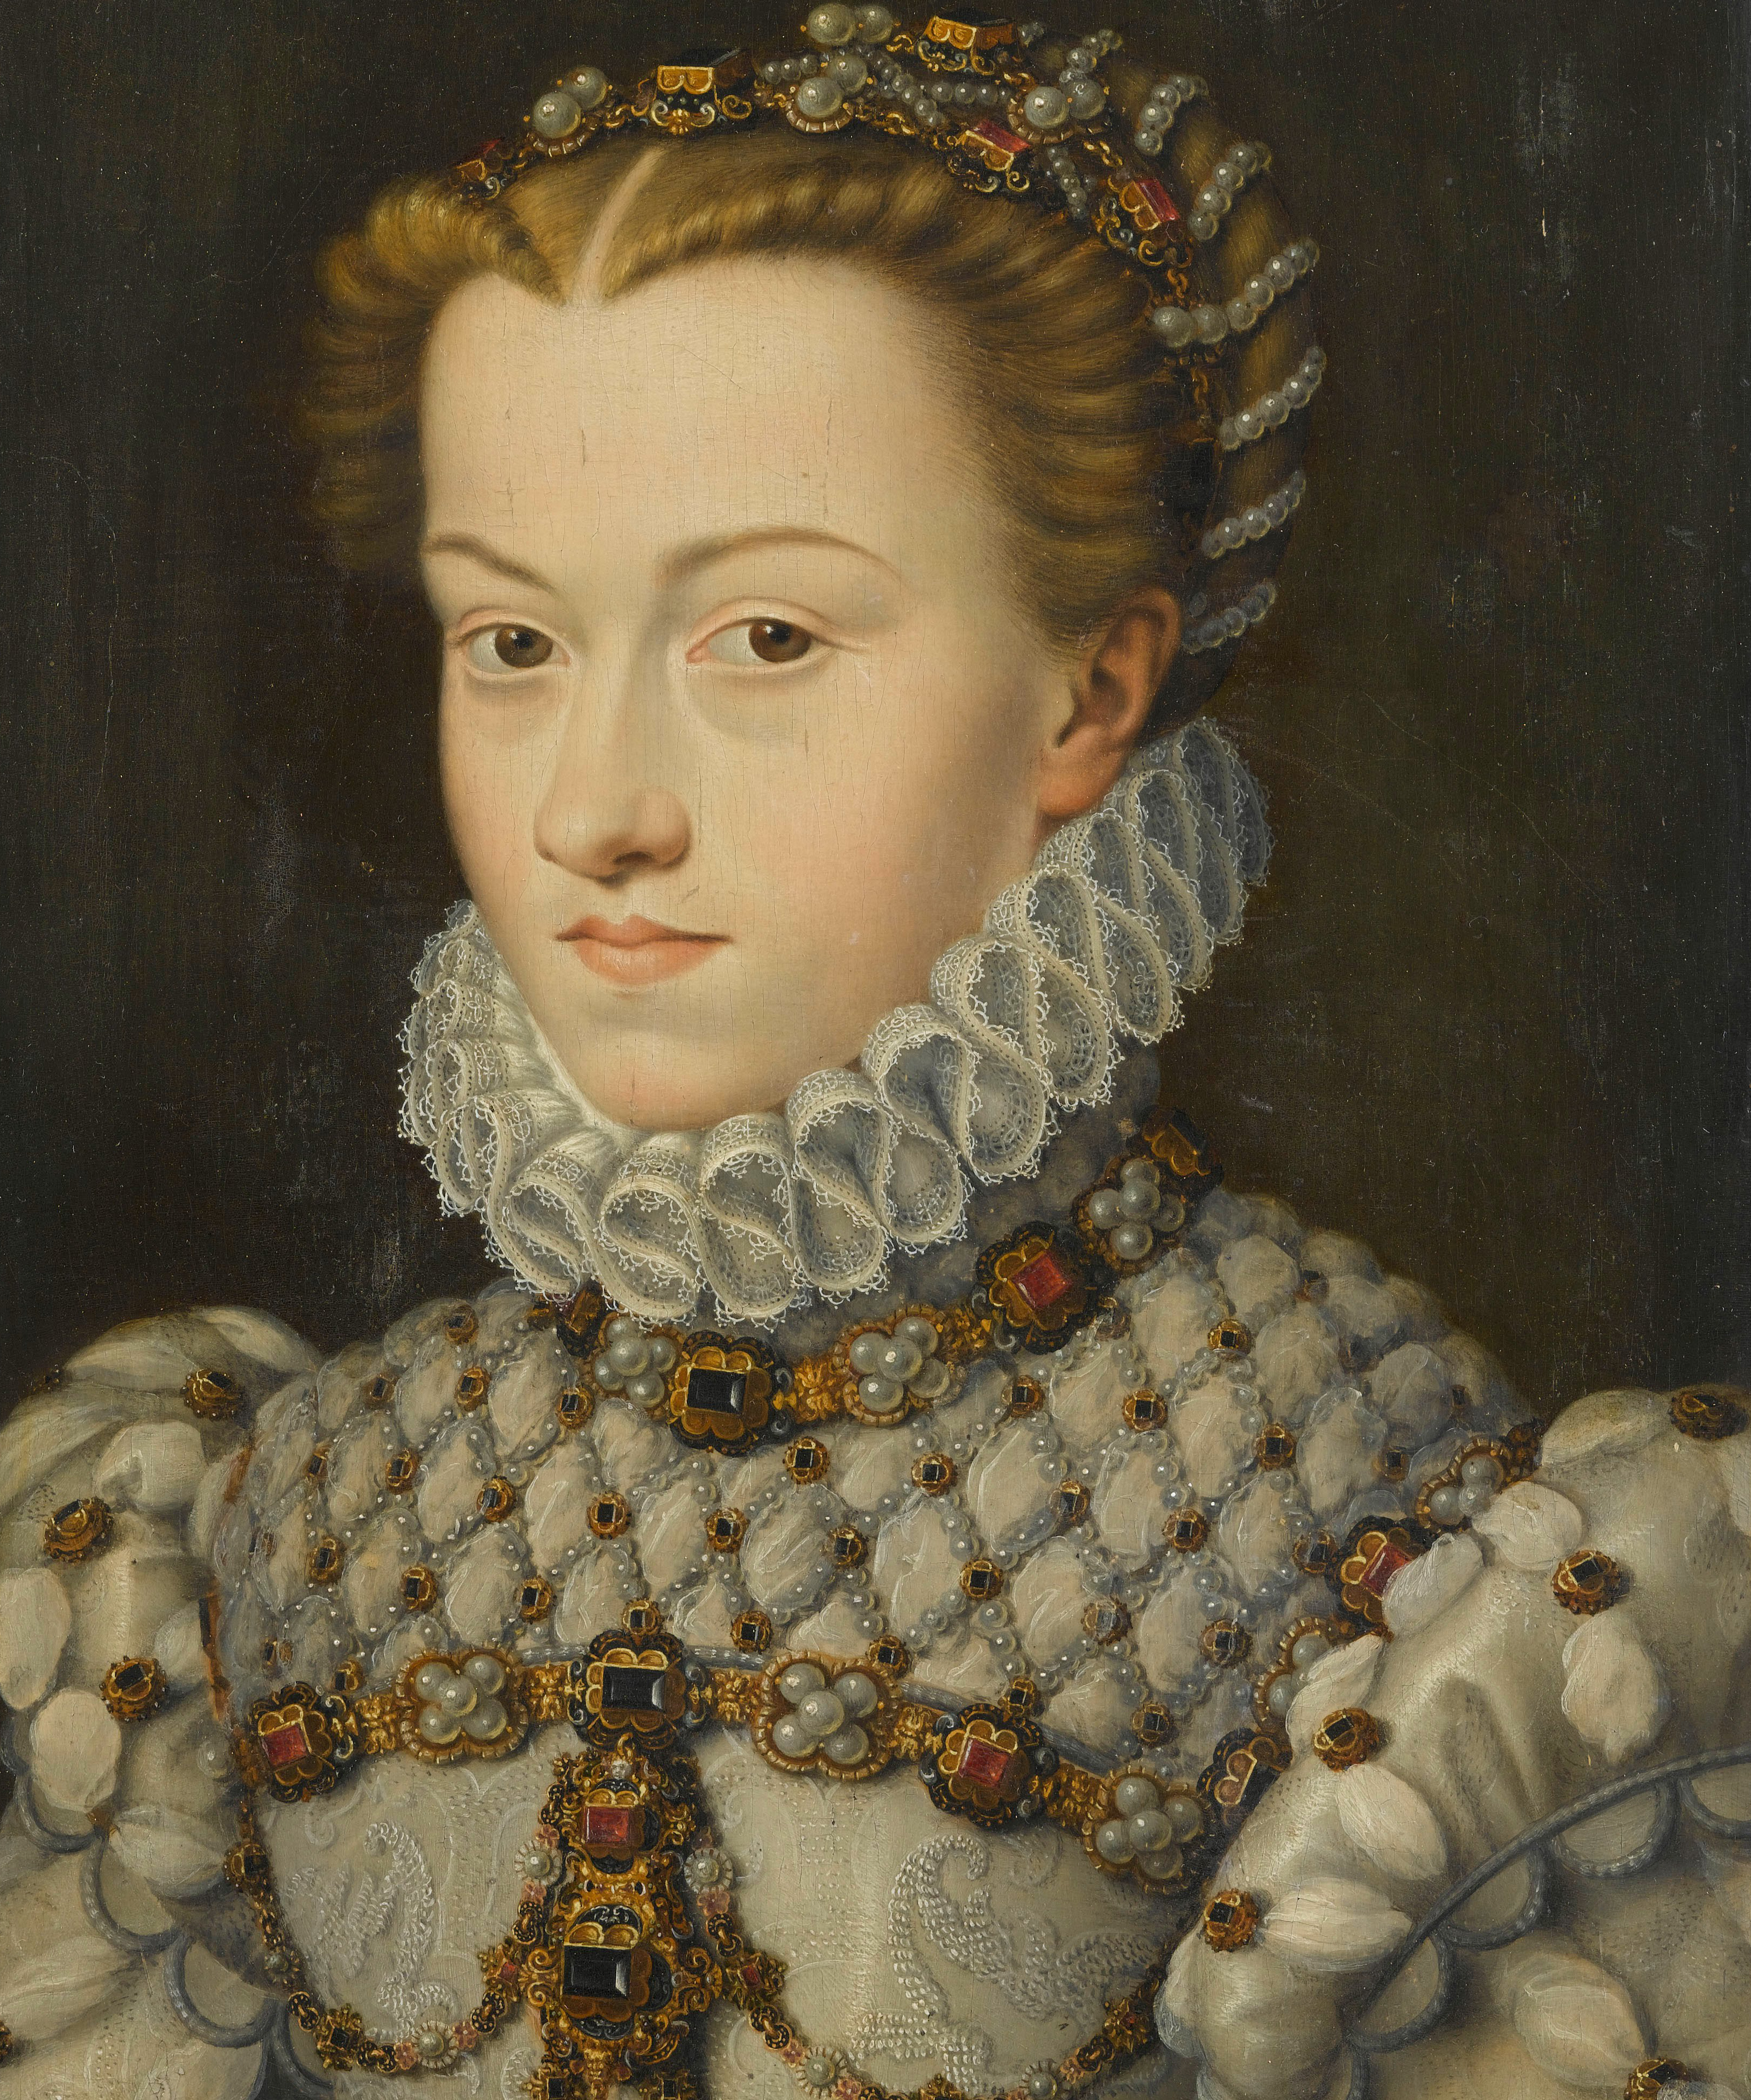 Elizabeth of Austria, Queen of France, wearing table-cut diamonds that are foiled in black, by Francois Clouet, ca 1571. Conde Museum. 